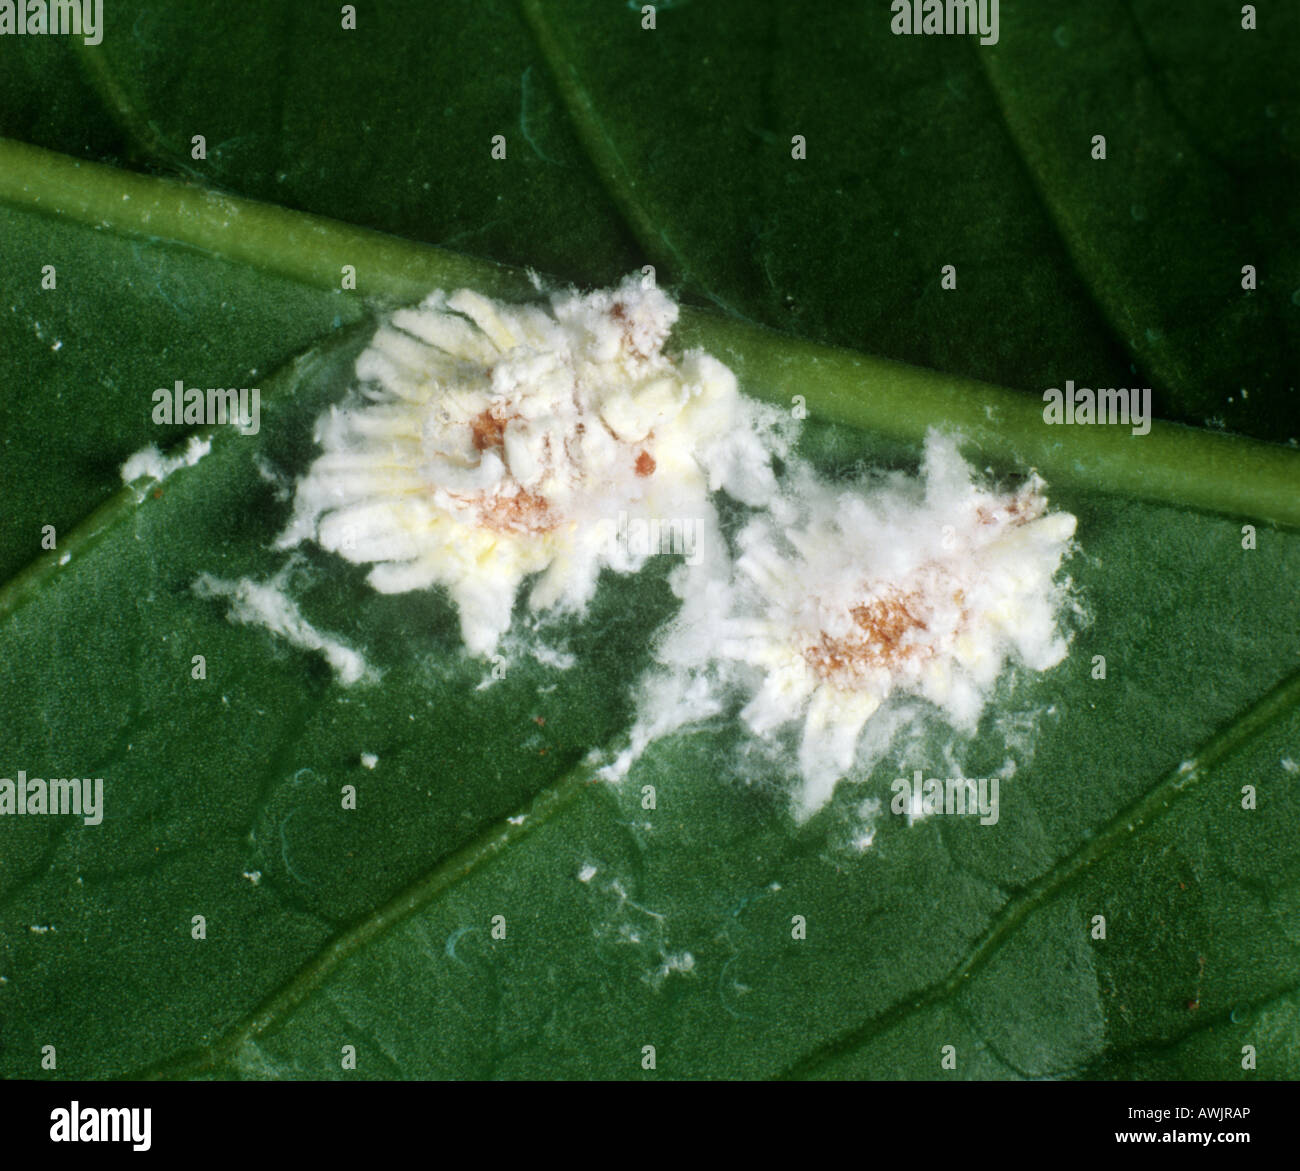 Cottony cushion scale insects Icerya sp. on a coffee leaf Kenya Stock Photo